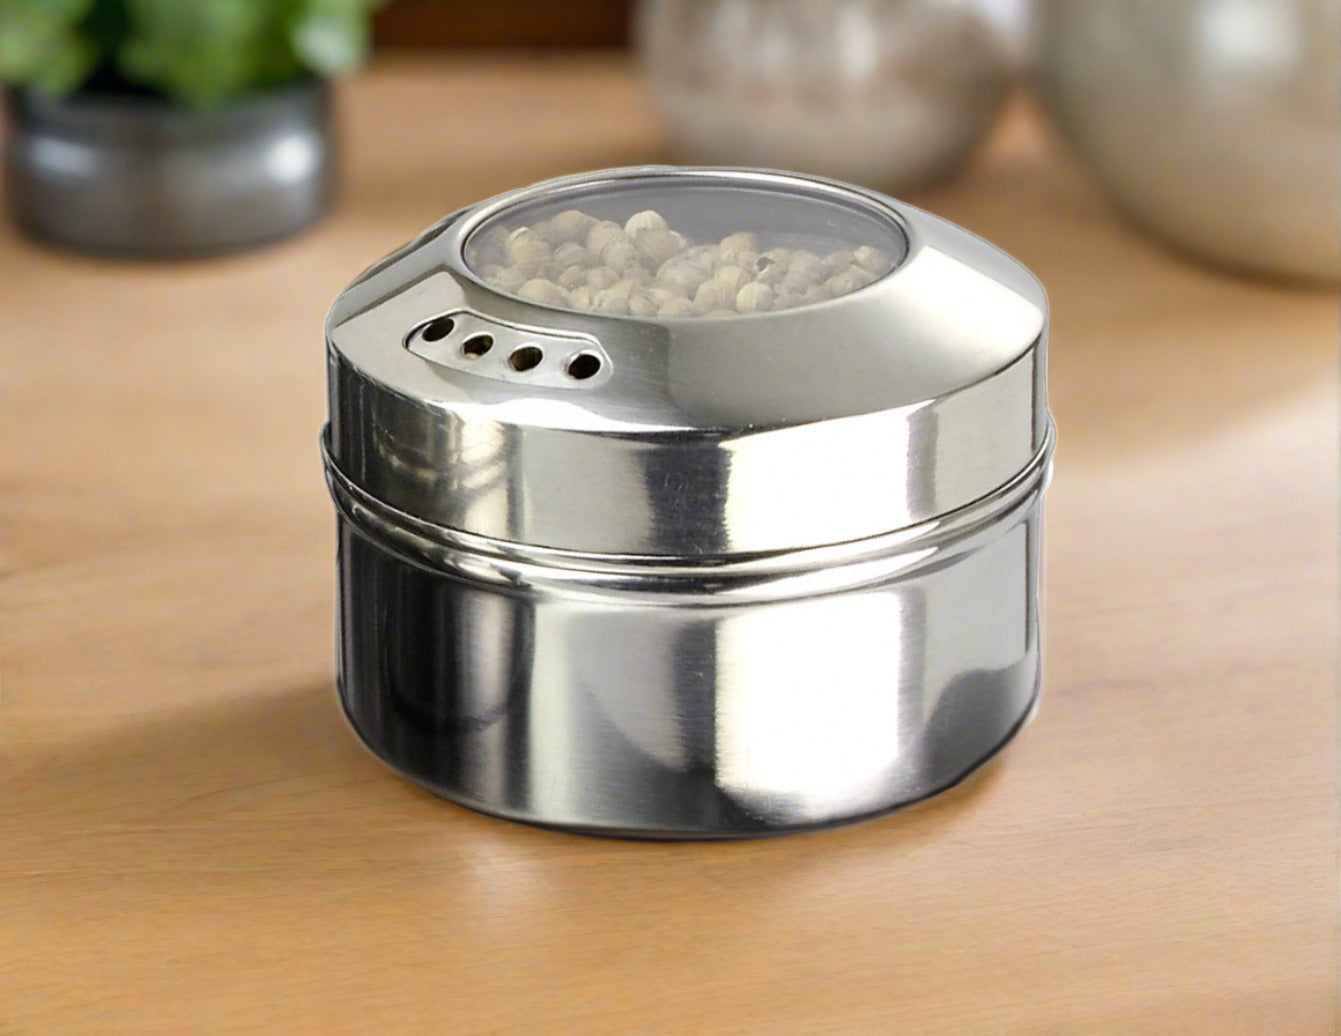 Cuisinox Magnetic Spice Canister / Shaker